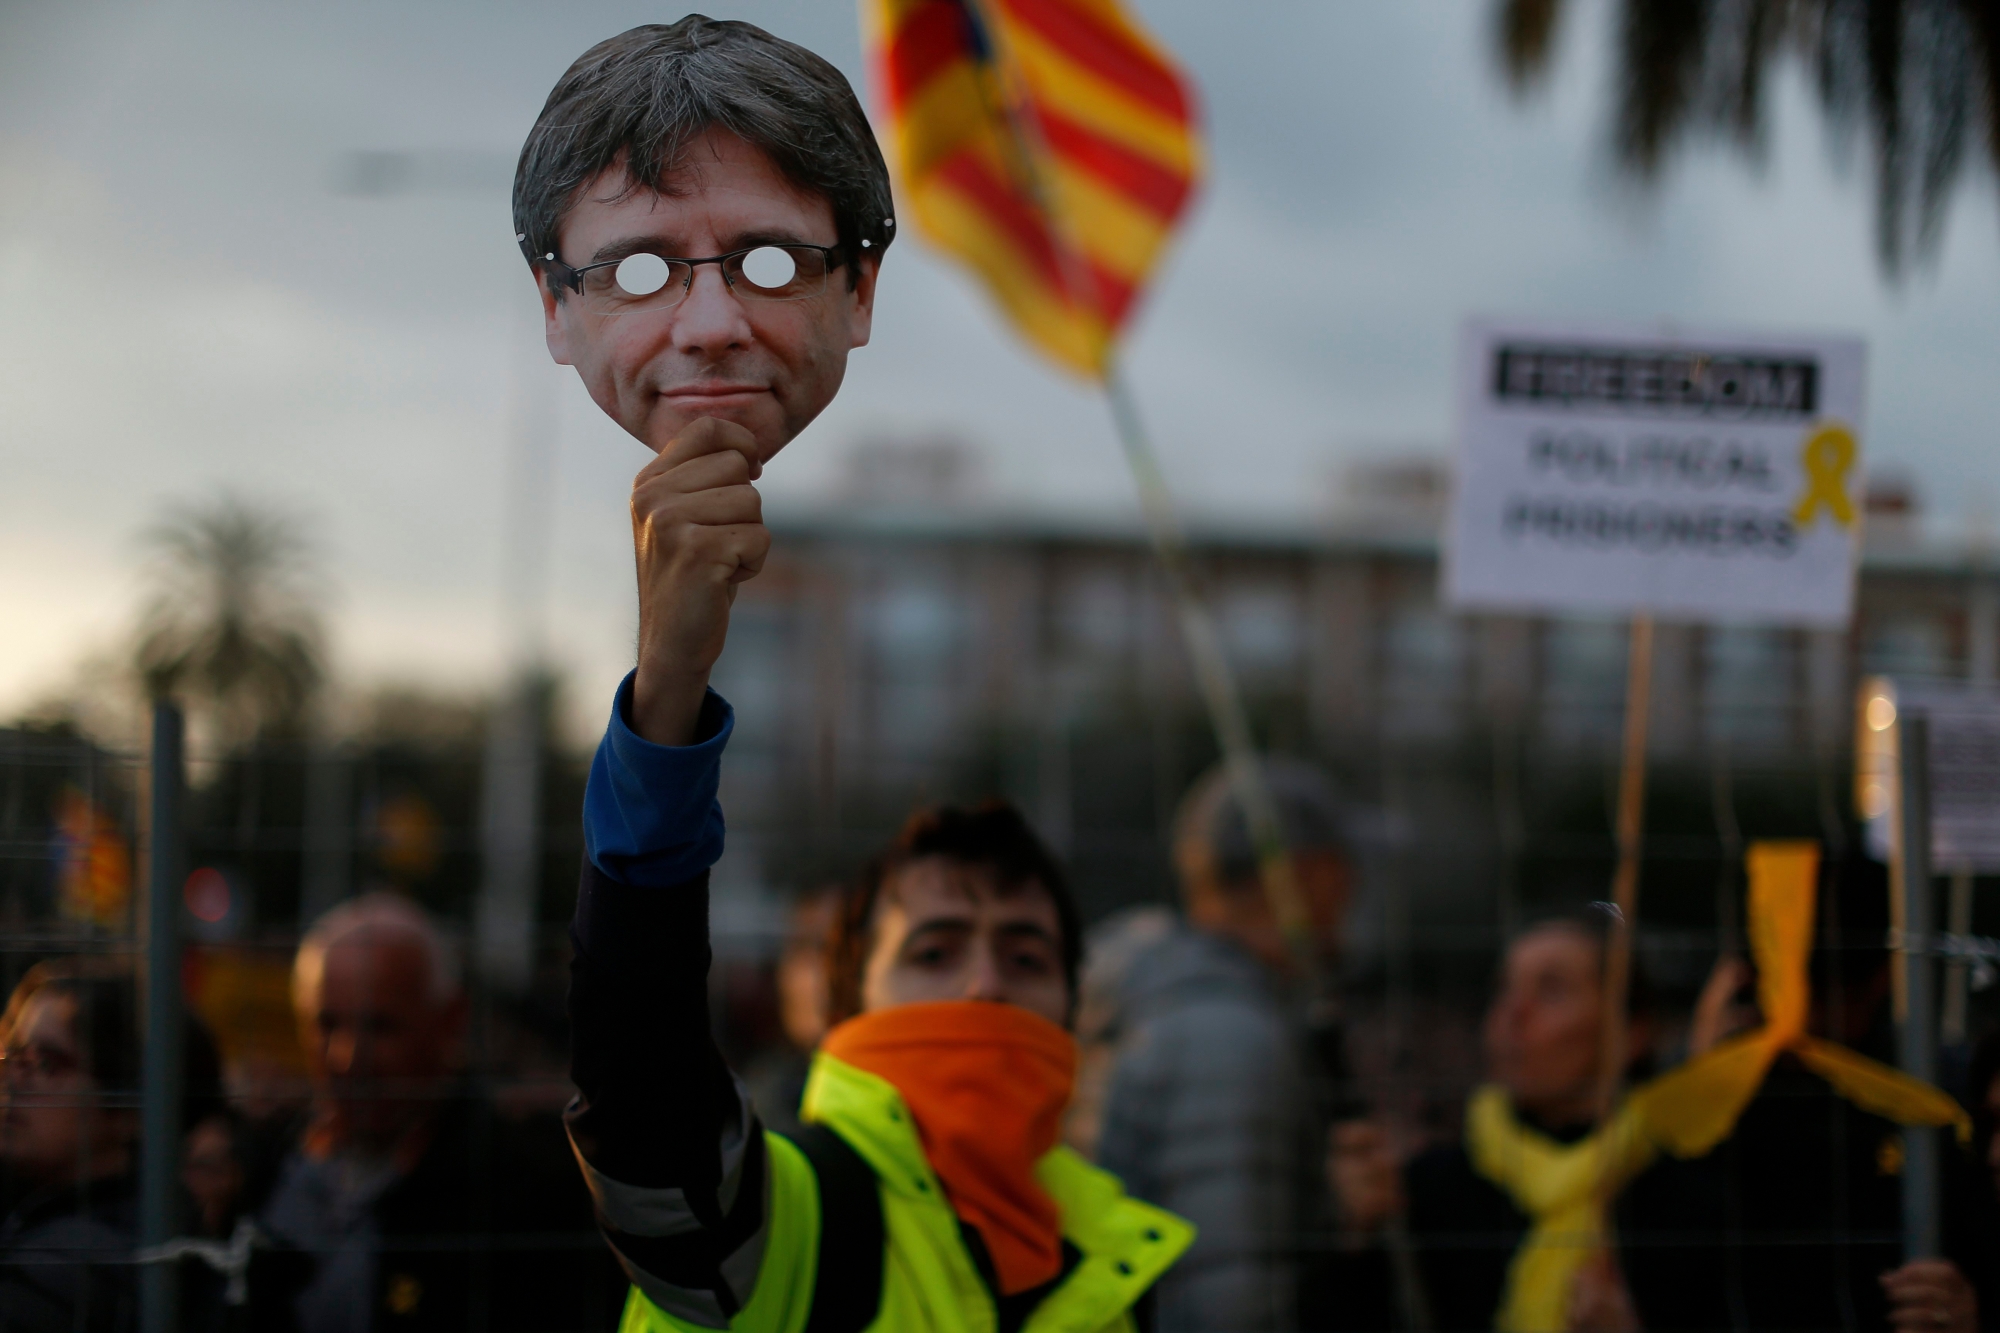 A pro independence demonstrator holds up a Carles Puigdemont mask during a protest of the detention of deposed leader of Catalonia's pro-independence party Carles Puigdemont in Barcelona, Spain, Sunday, March 25, 2018. Puigdemont was arrested Sunday by German police on an international warrant as he tried to enter the country from Denmark. (AP Photo/Manu Fernandez) Spain Catalonia